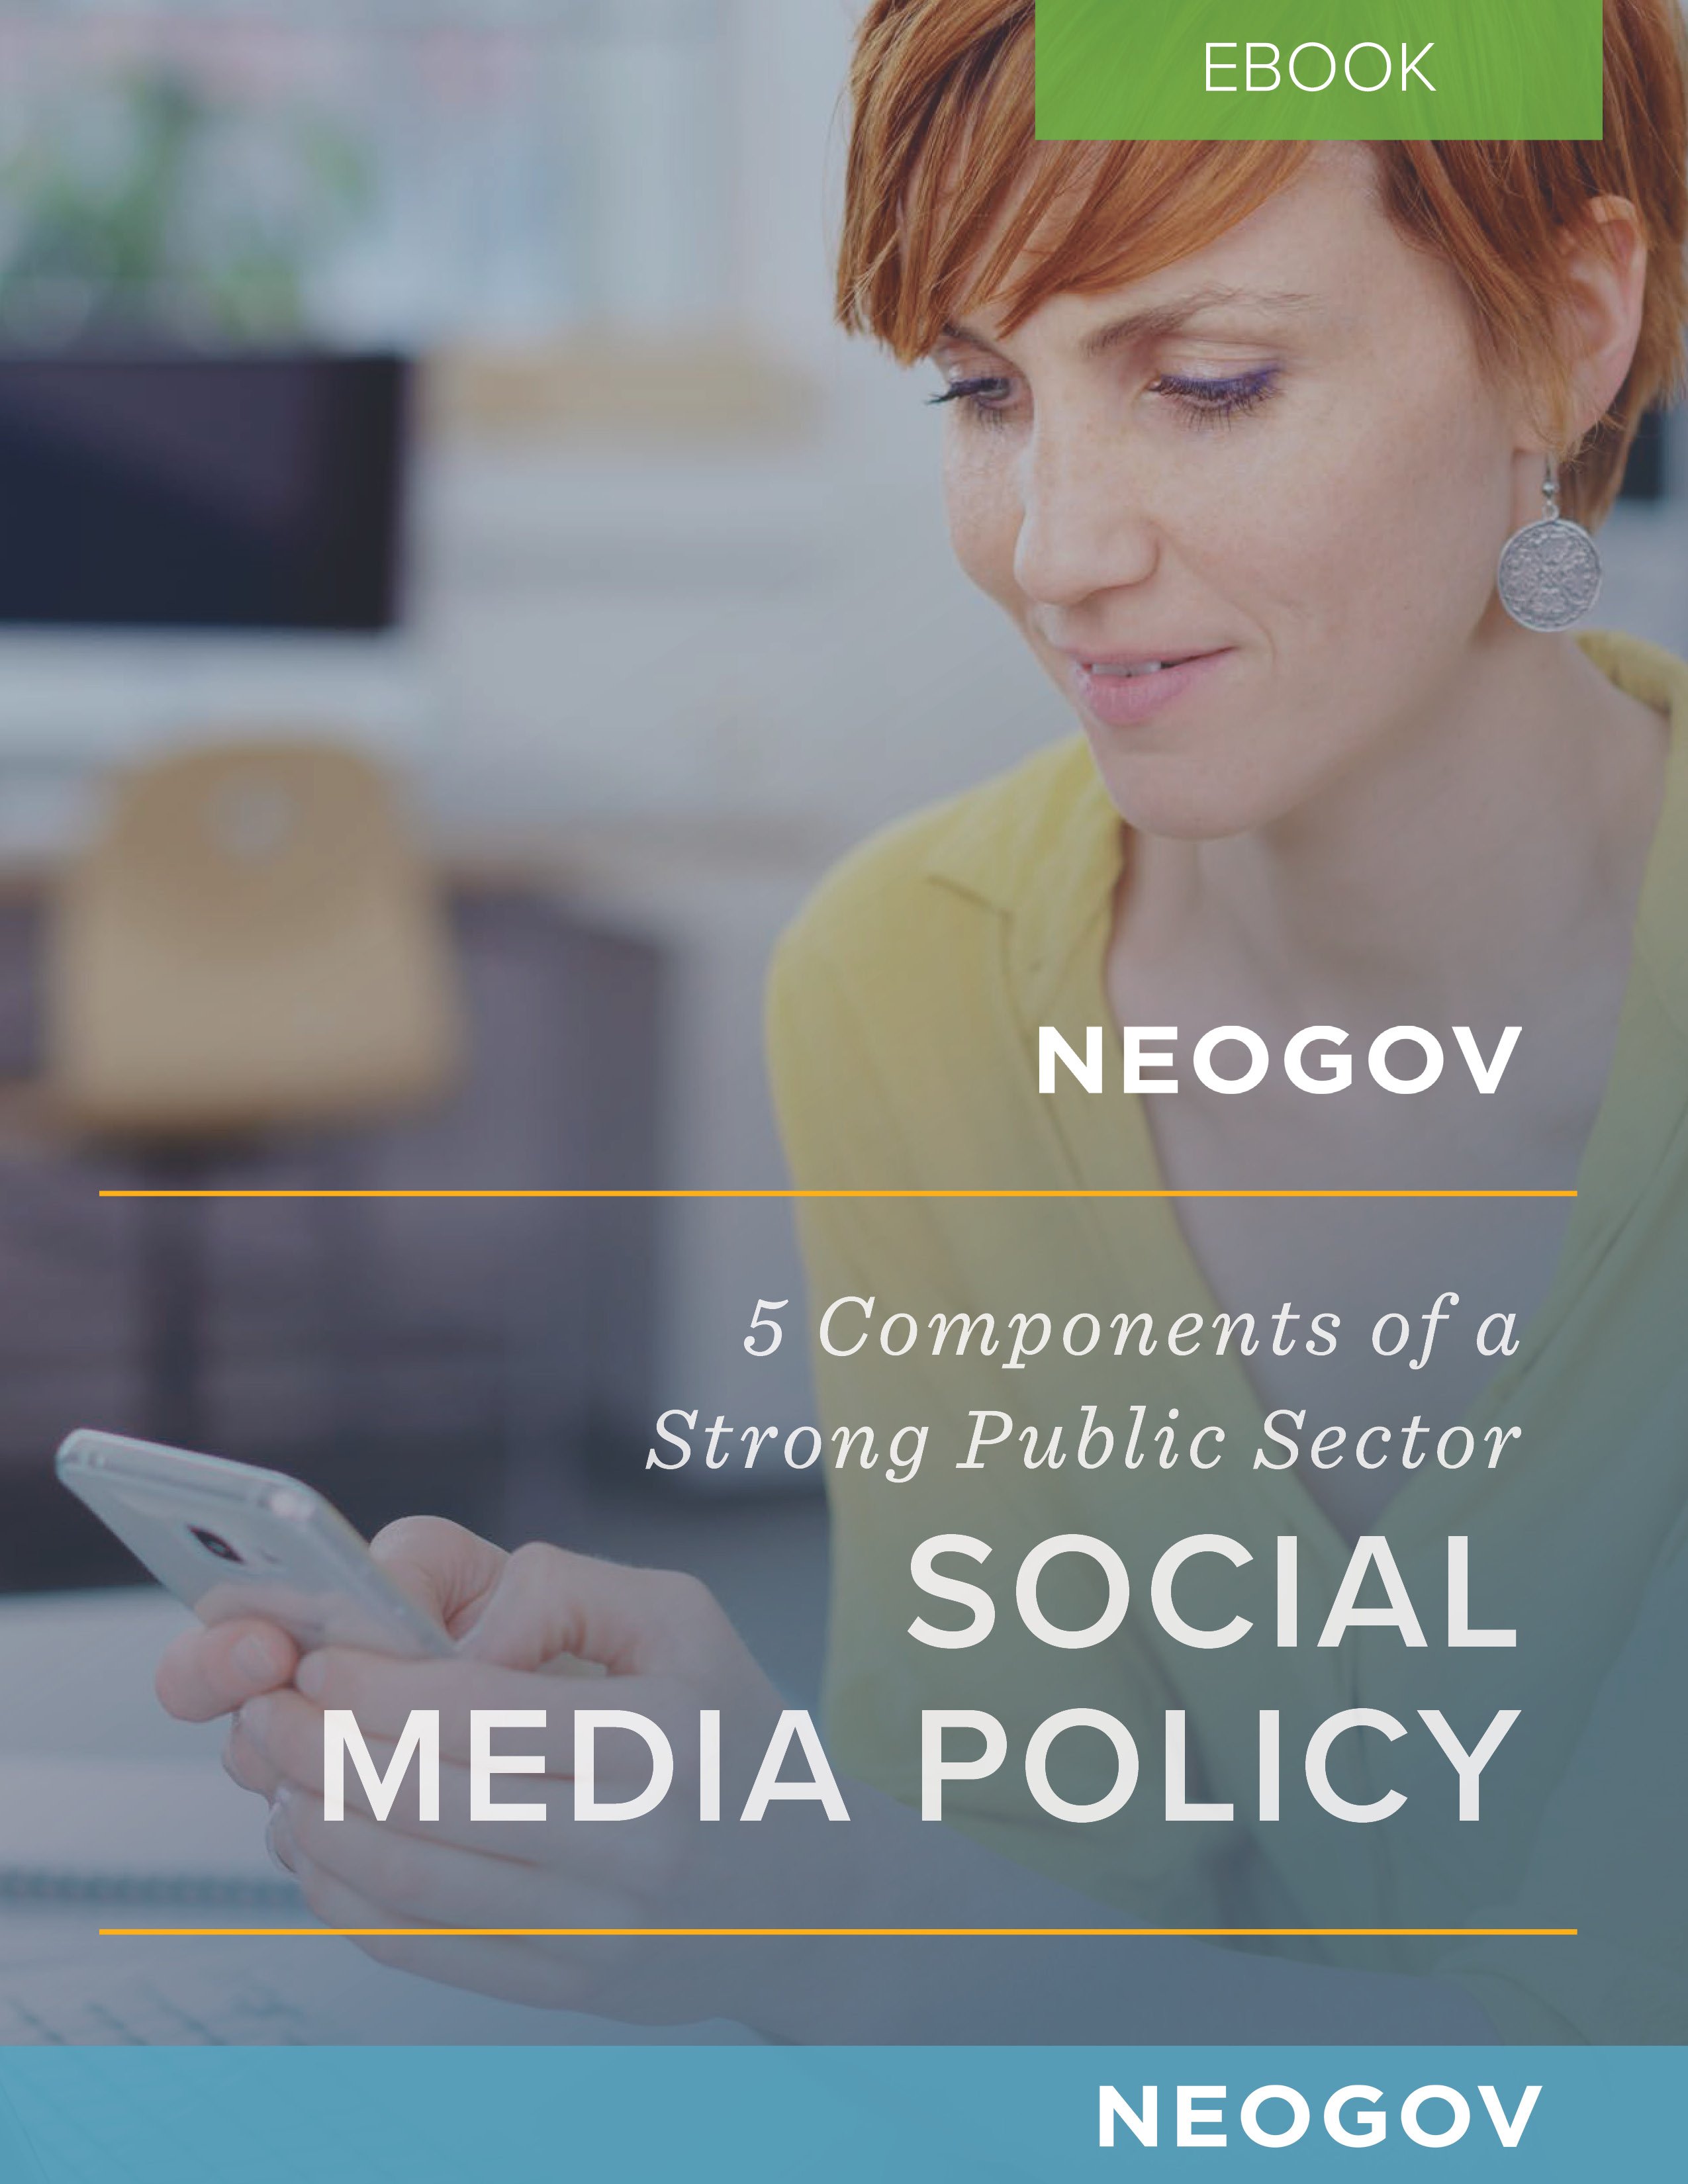 5 Components of a Strong Social Media Policy